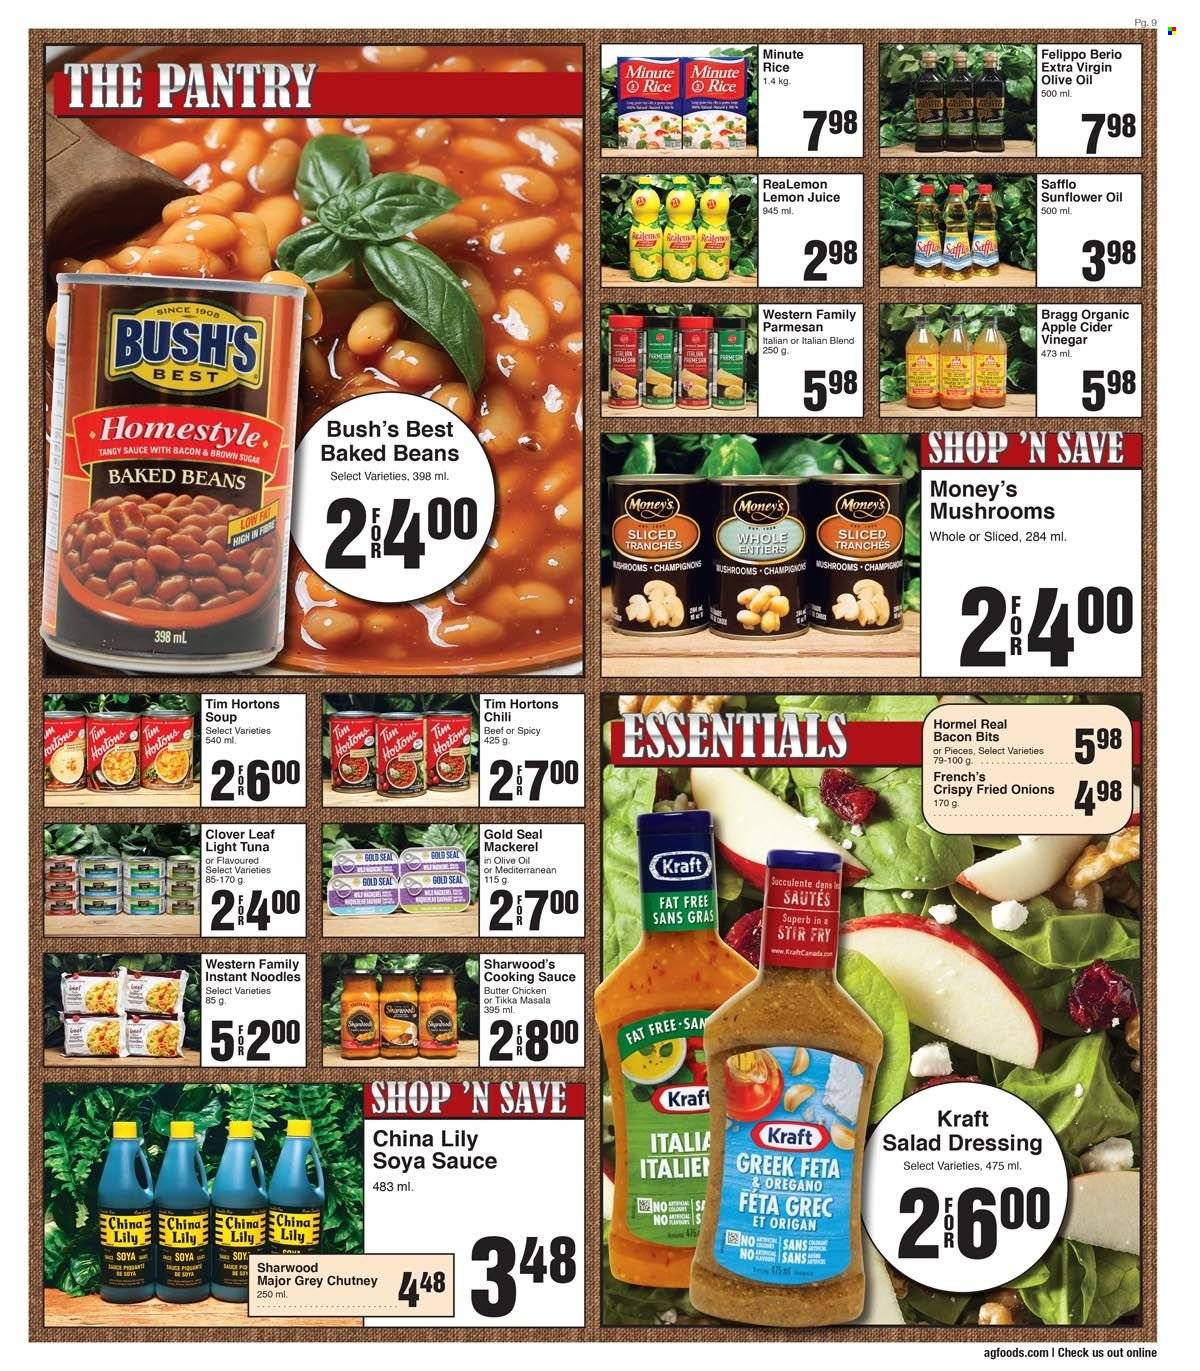 AG Foods flyer  - May 15, 2022 - May 21, 2022.